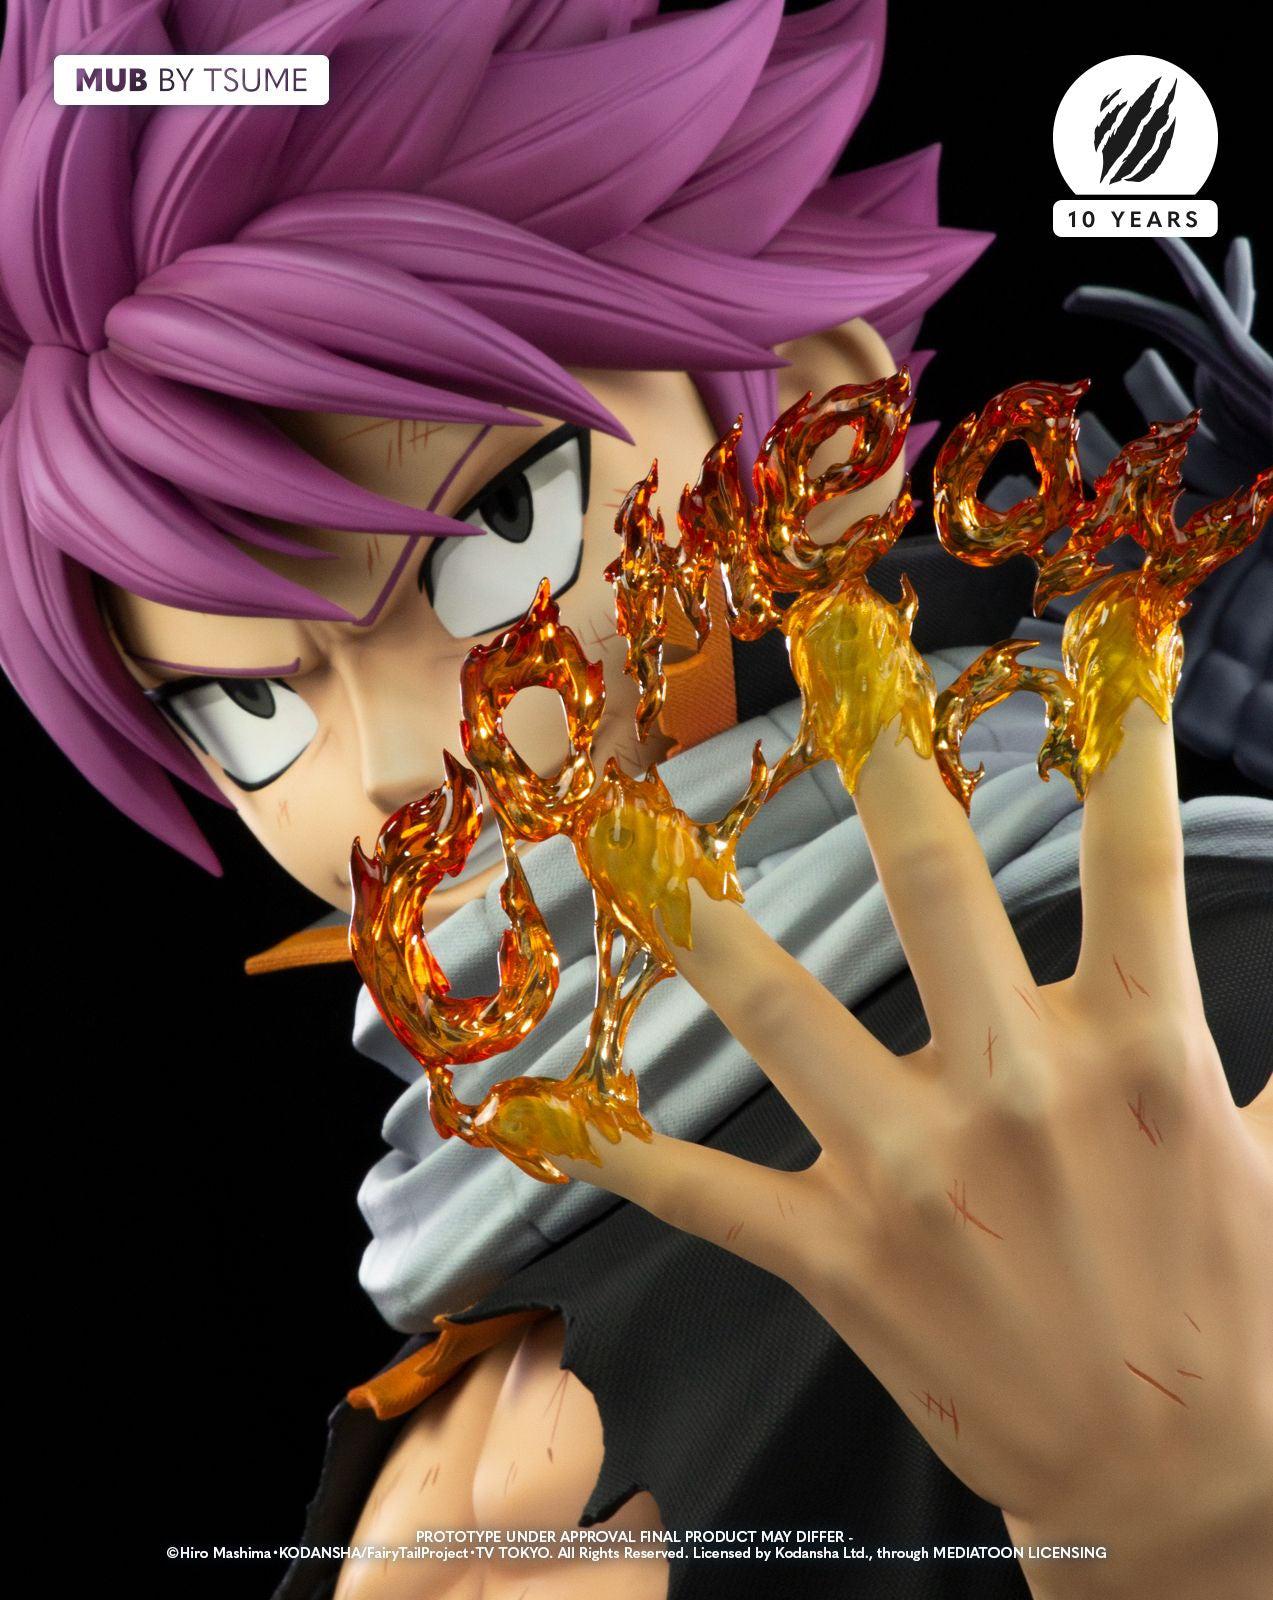 Fairy Tail HQS Plus Natsu Dragneel 1/1 Scale Limited Edition Bust